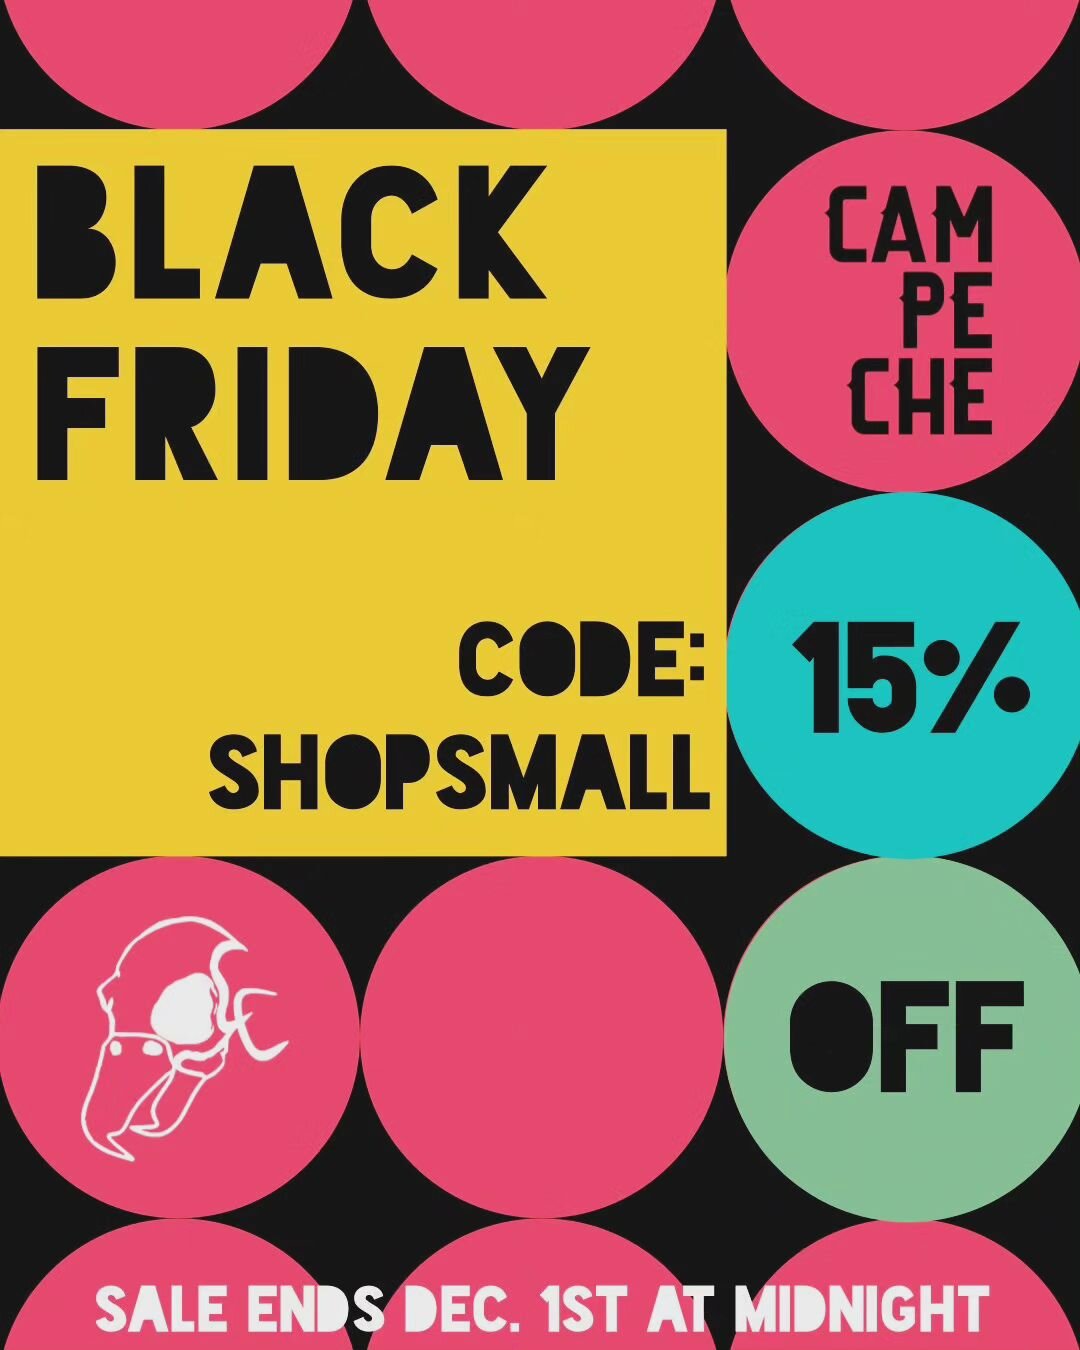 Getting you holiday shopping done this weekend? Why not support small business this year and do your shopping at campechecollective.com?

Now through Dec 1st, use code SHOPSMALL at checkout for 15% everything in store! Free shipping for orders over $